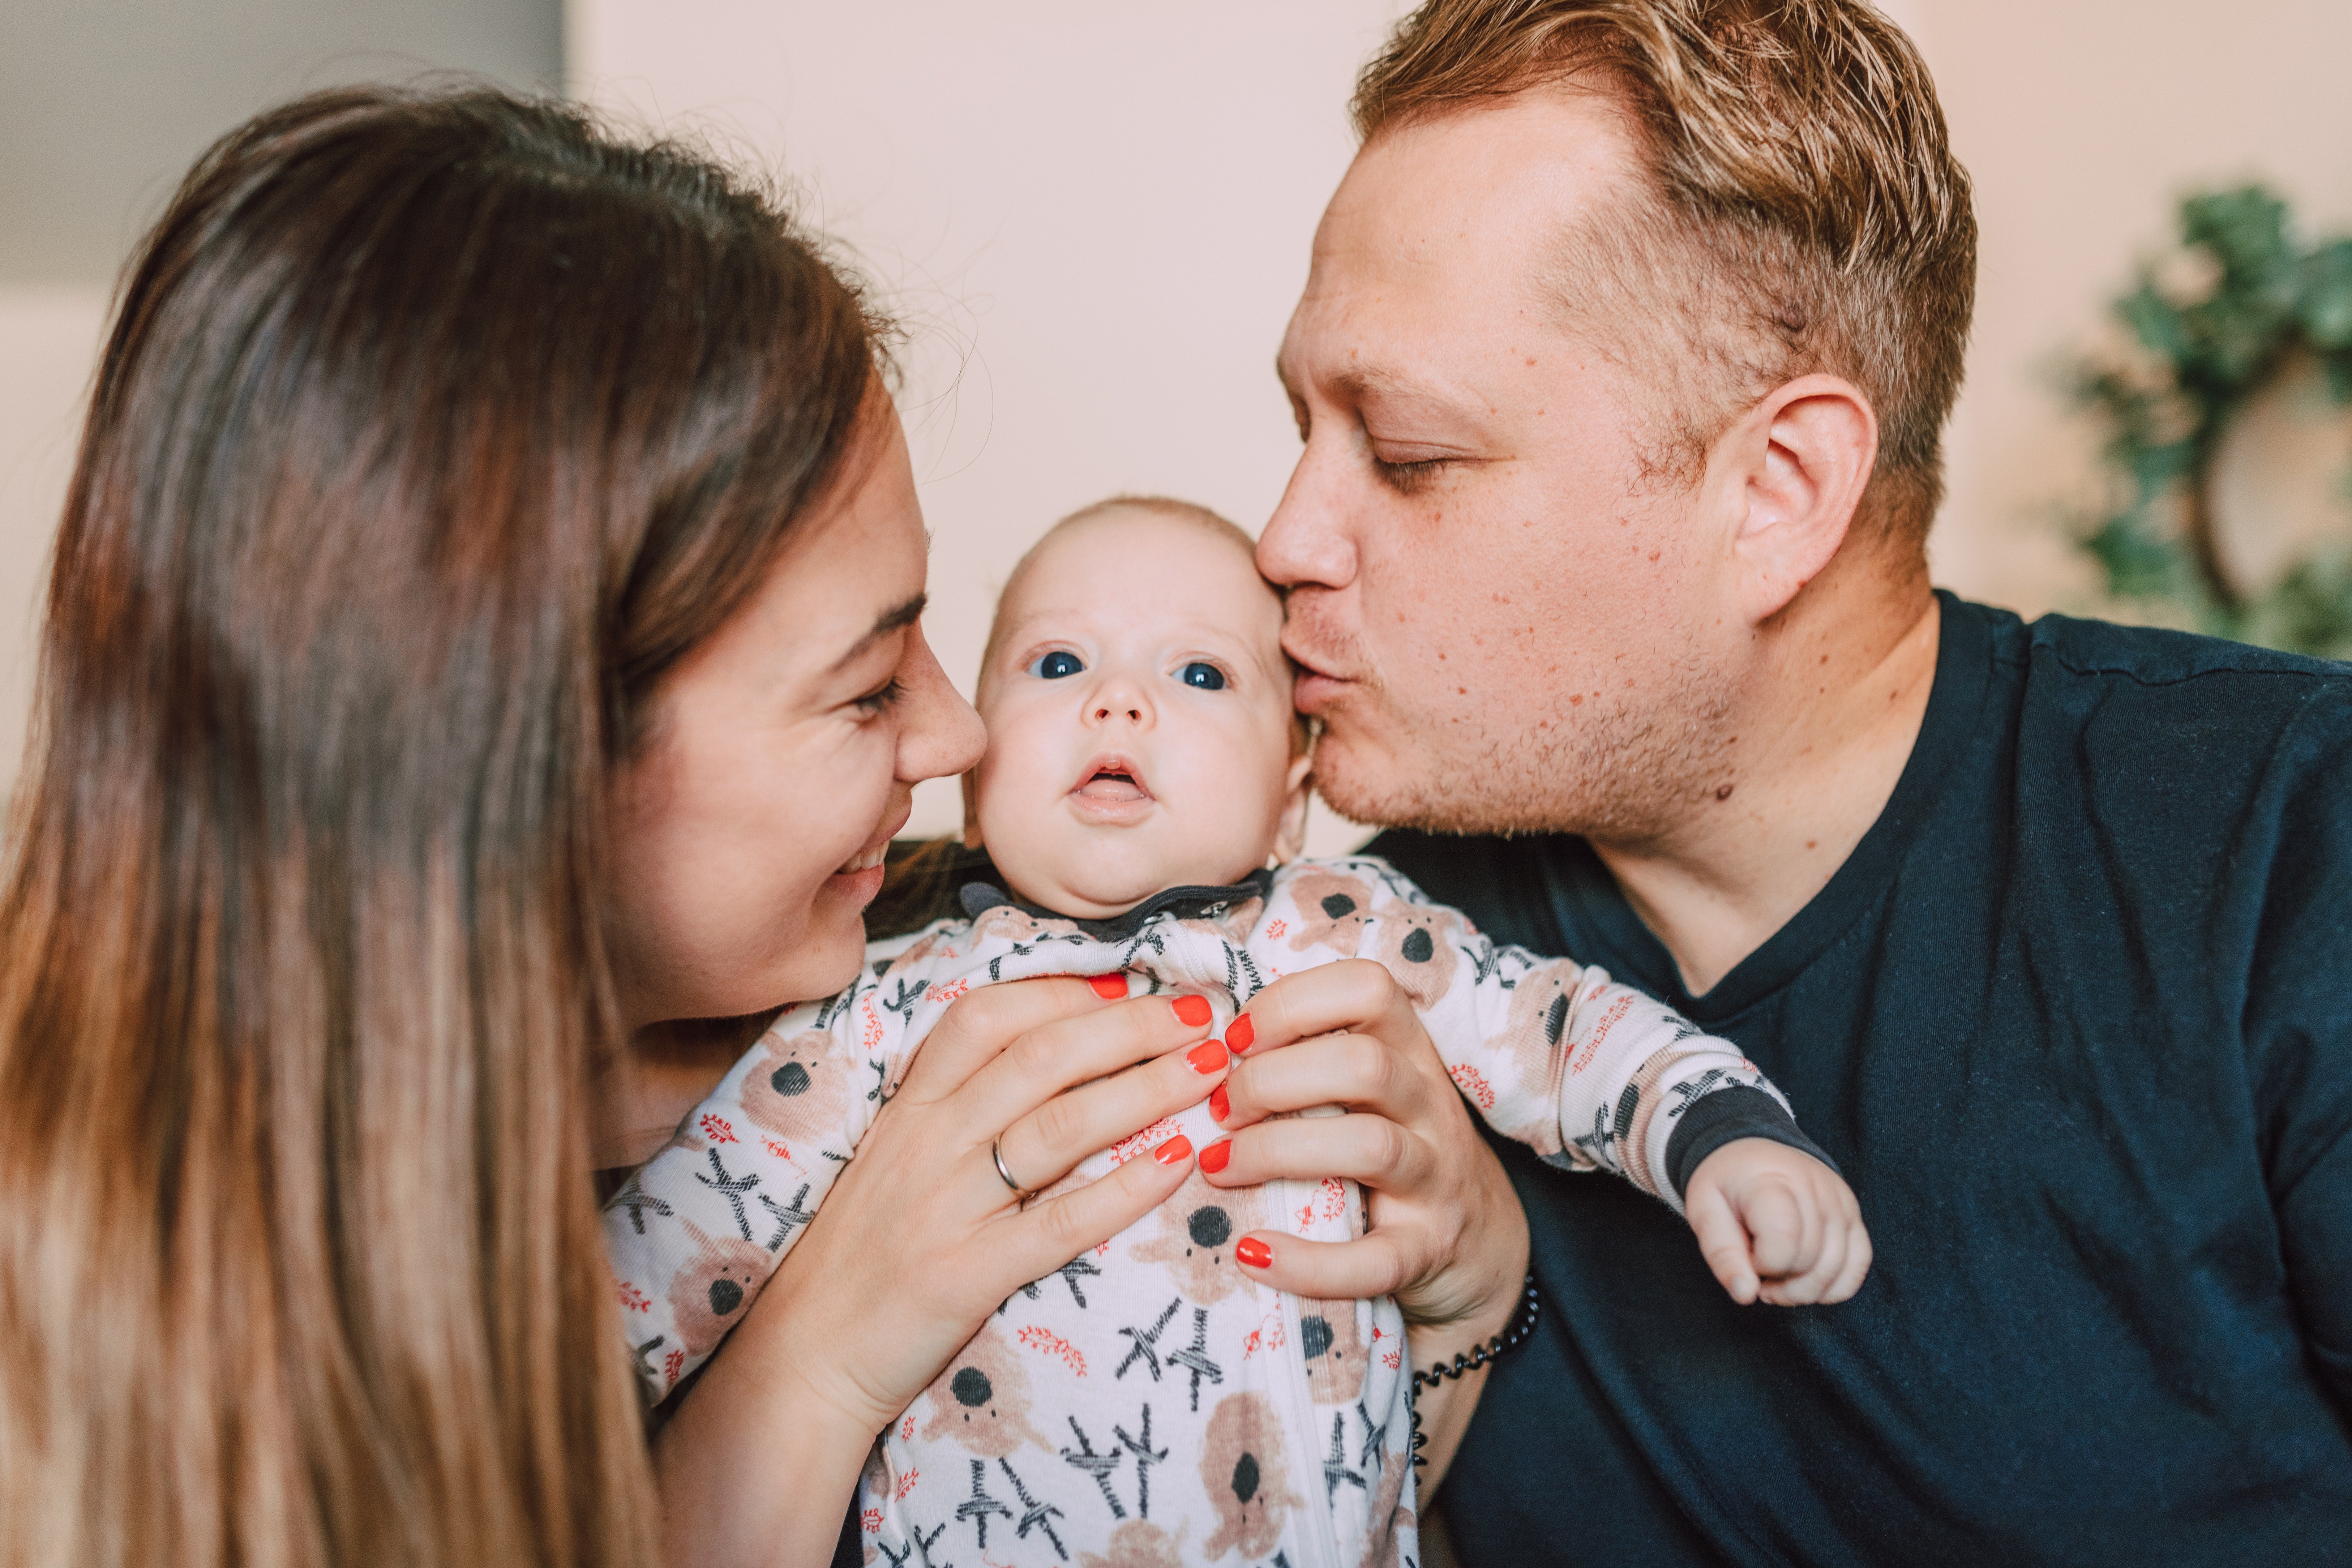 Caroline and Andrew adopted the baby | Photo: Pexels